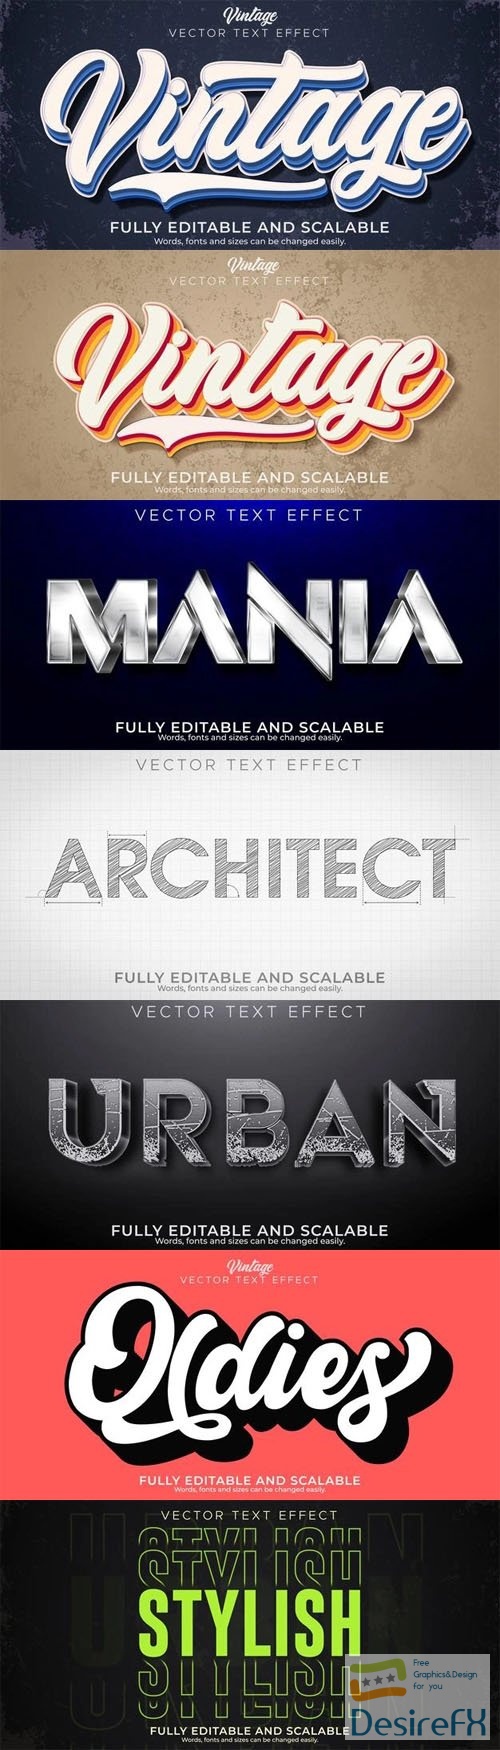 14 Text Effects Vector Styles Templates